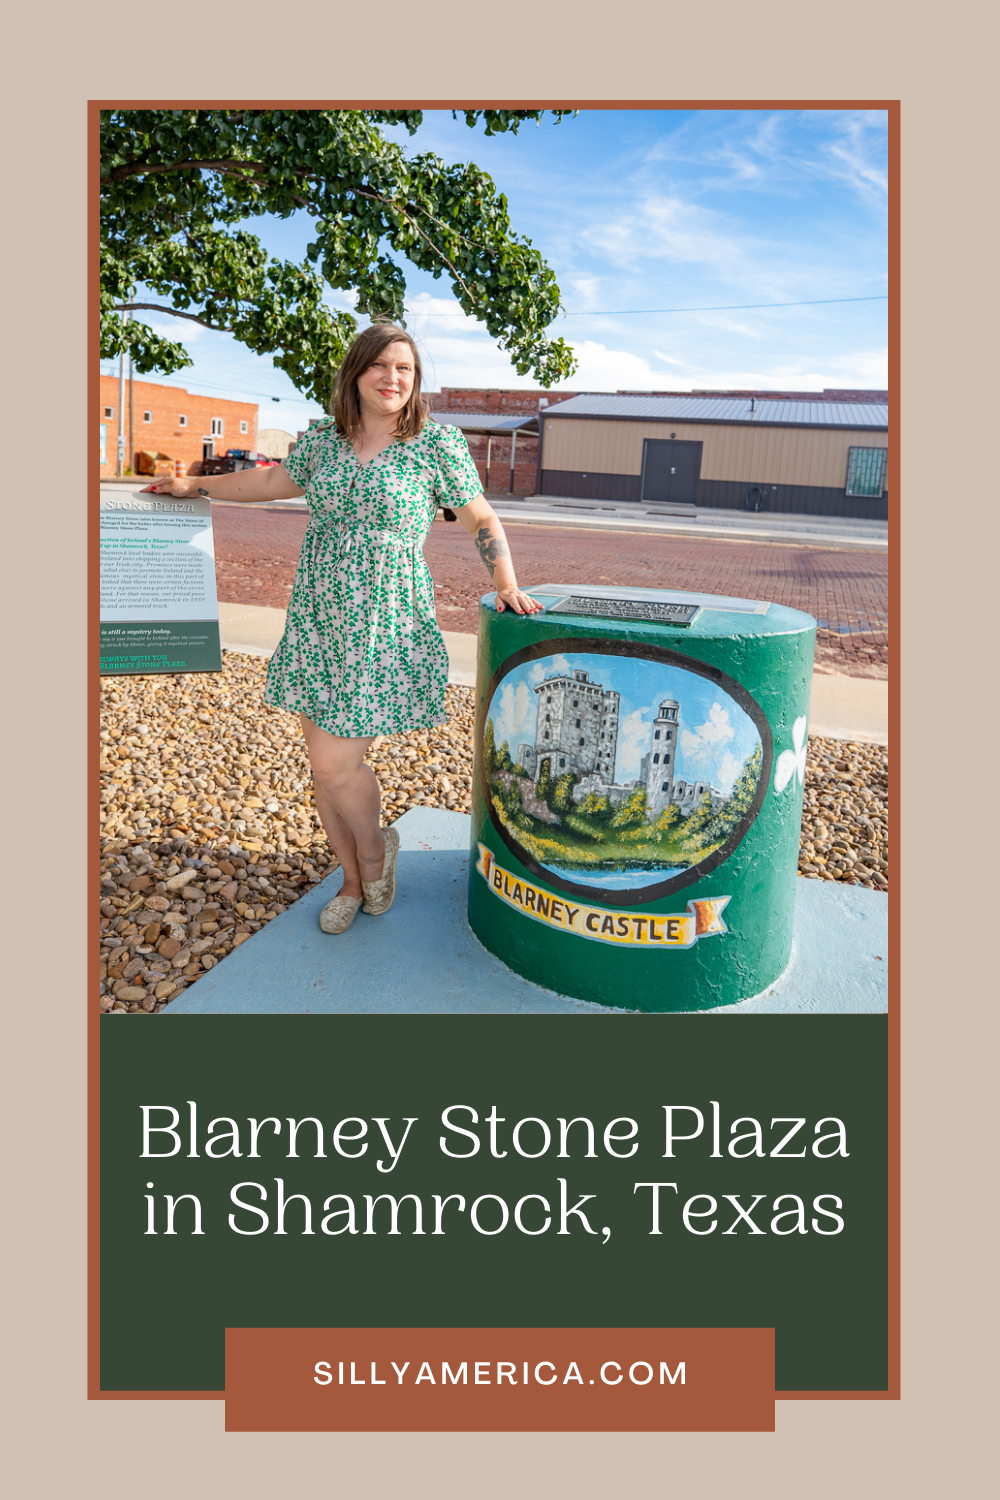 They say that kissing the Blarney Stone will give you the gift of eloquence. And it's a good thing, because you will want to tell everyone about this roadside attraction: the Blarney Stone in Shamrock, Texas…that's right, Texas, not Ireland. Visit this Texas roadside attraction on a Route 66 road trip.  #RoadTrips #RoadTripStop #Route66 #Route66RoadTrip #TexasRoute66 #Texas #TexasRoadTrip #TexasRoadsideAttractions #RoadsideAttractions #RoadsideAttraction #RoadsideAmerica #RoadTrip 